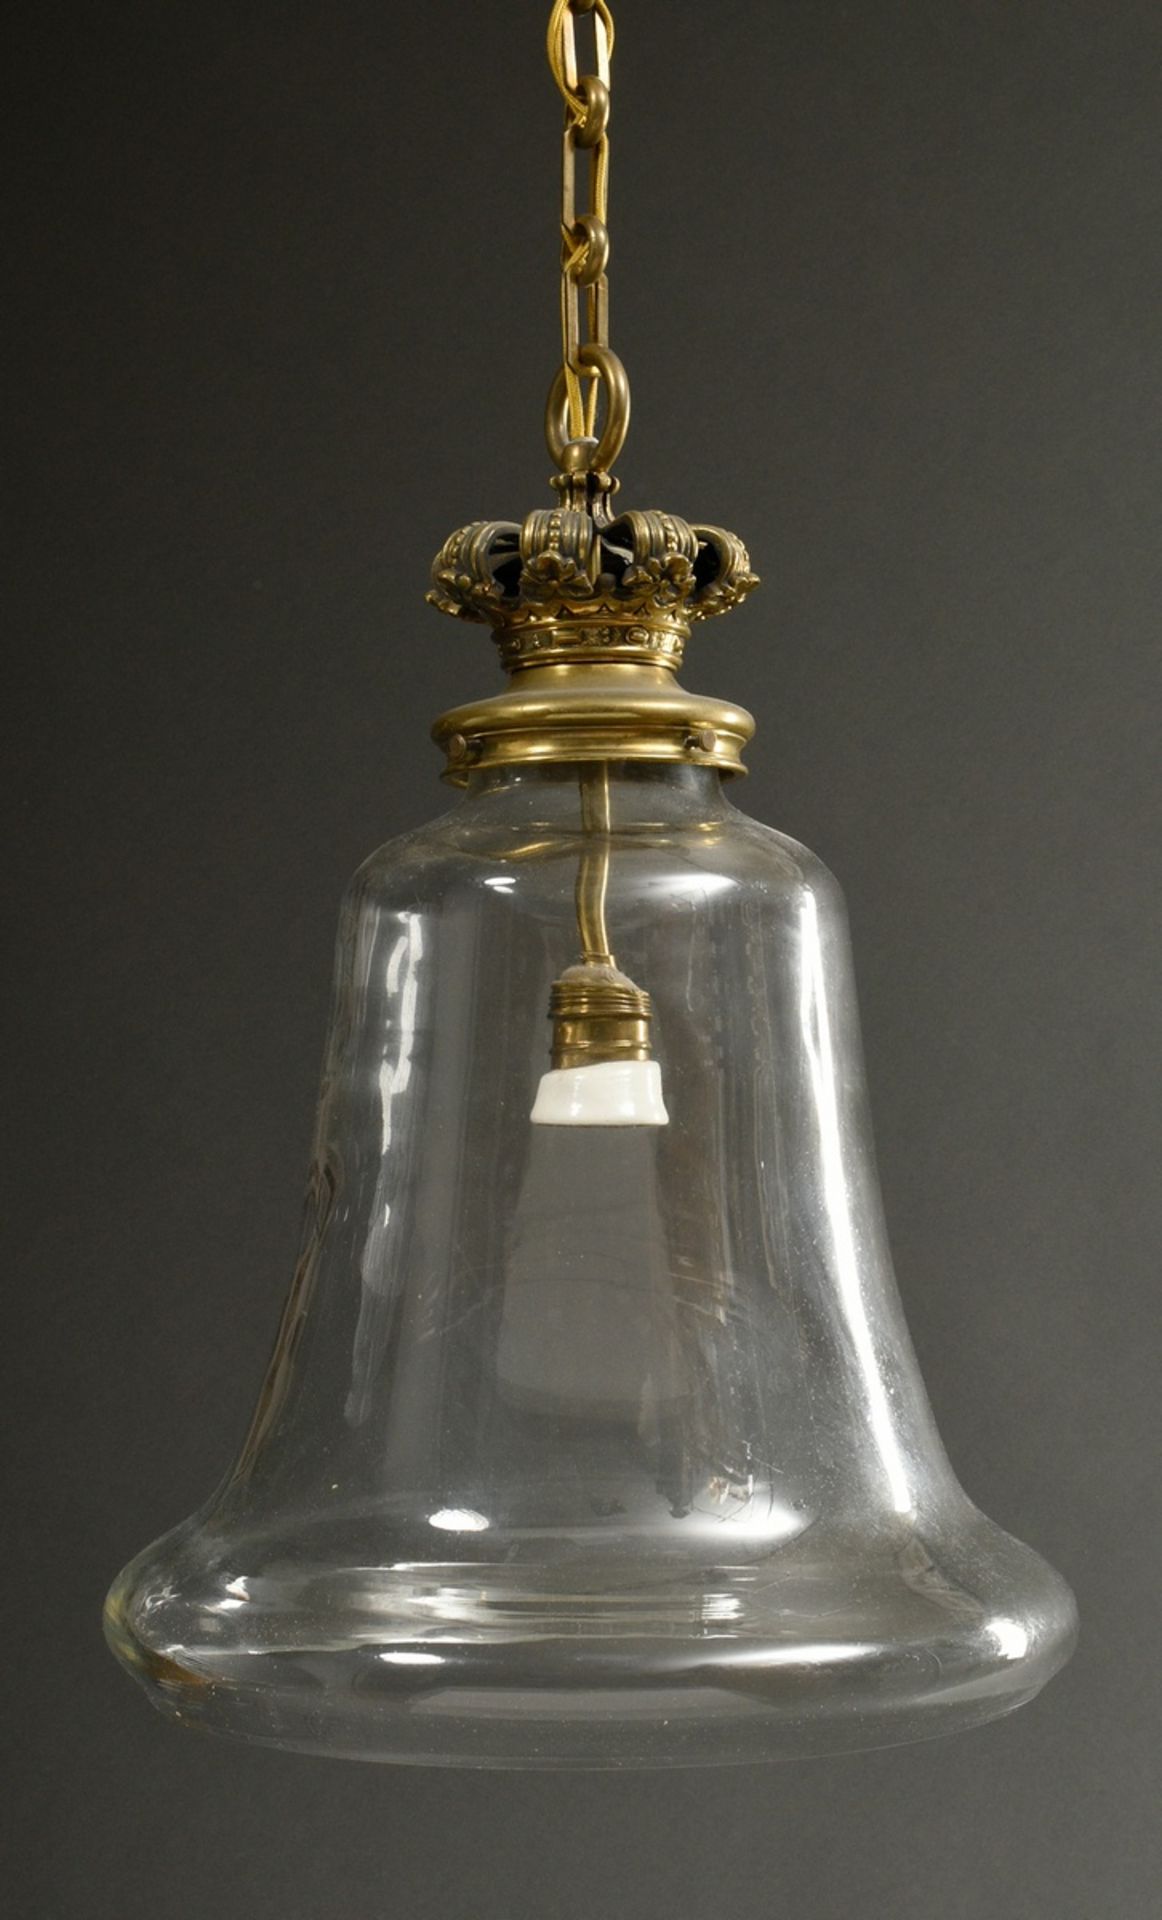 Ceiling lamp with bell-shaped glass dome and brass "crowns" mount, 20th c., electrified, h. 48cm